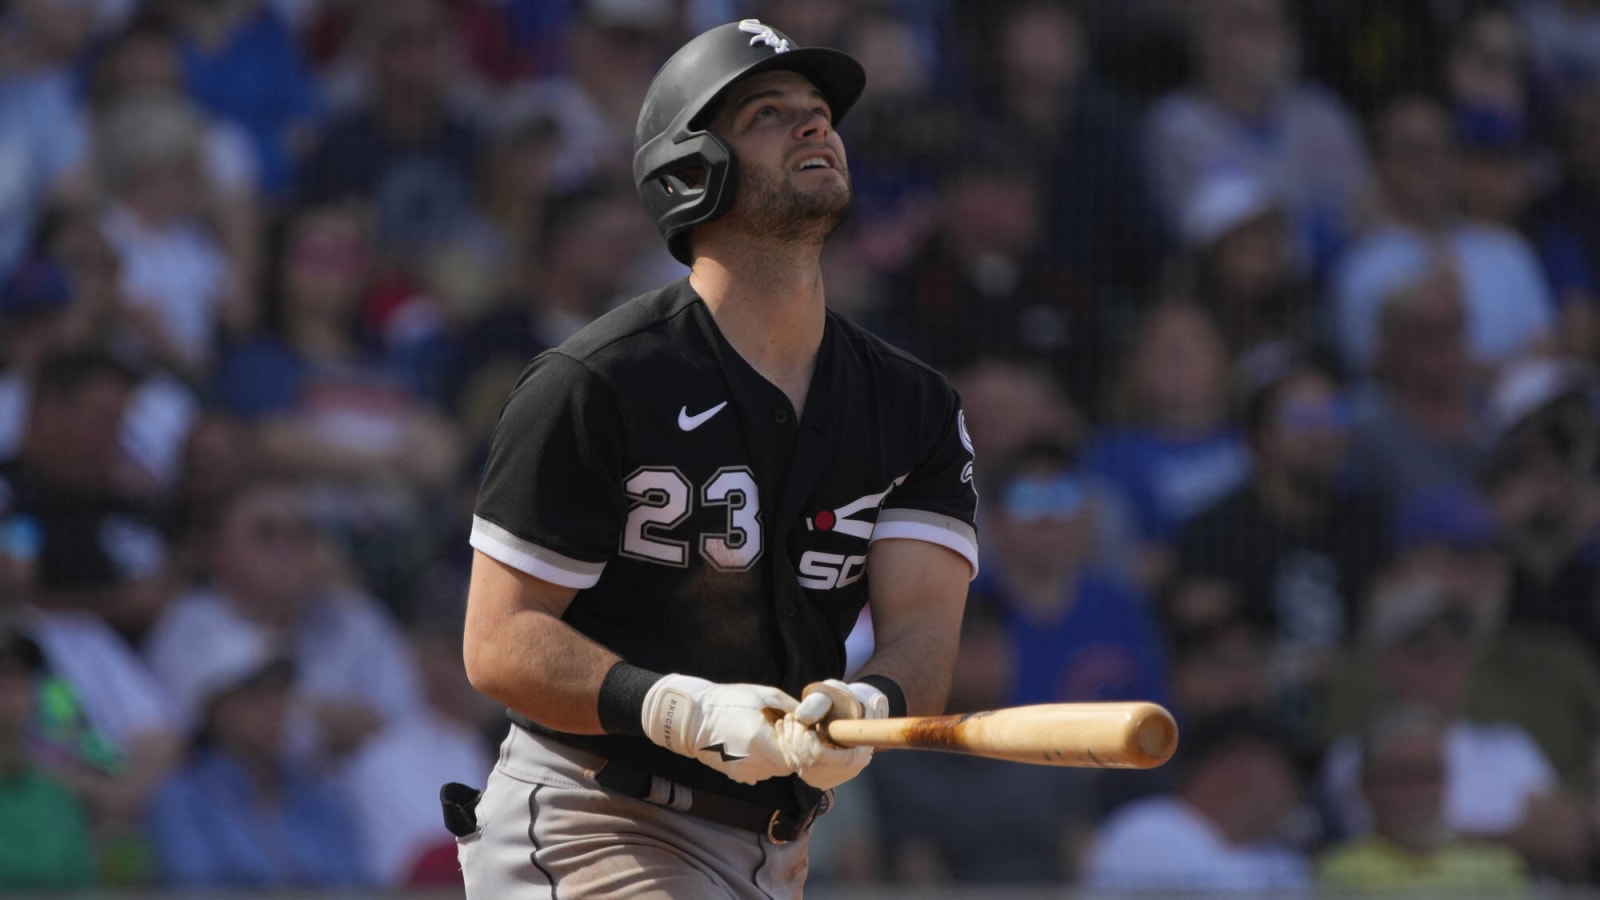 Chicago White Sox sign outfielder Andrew Benintendi to franchise